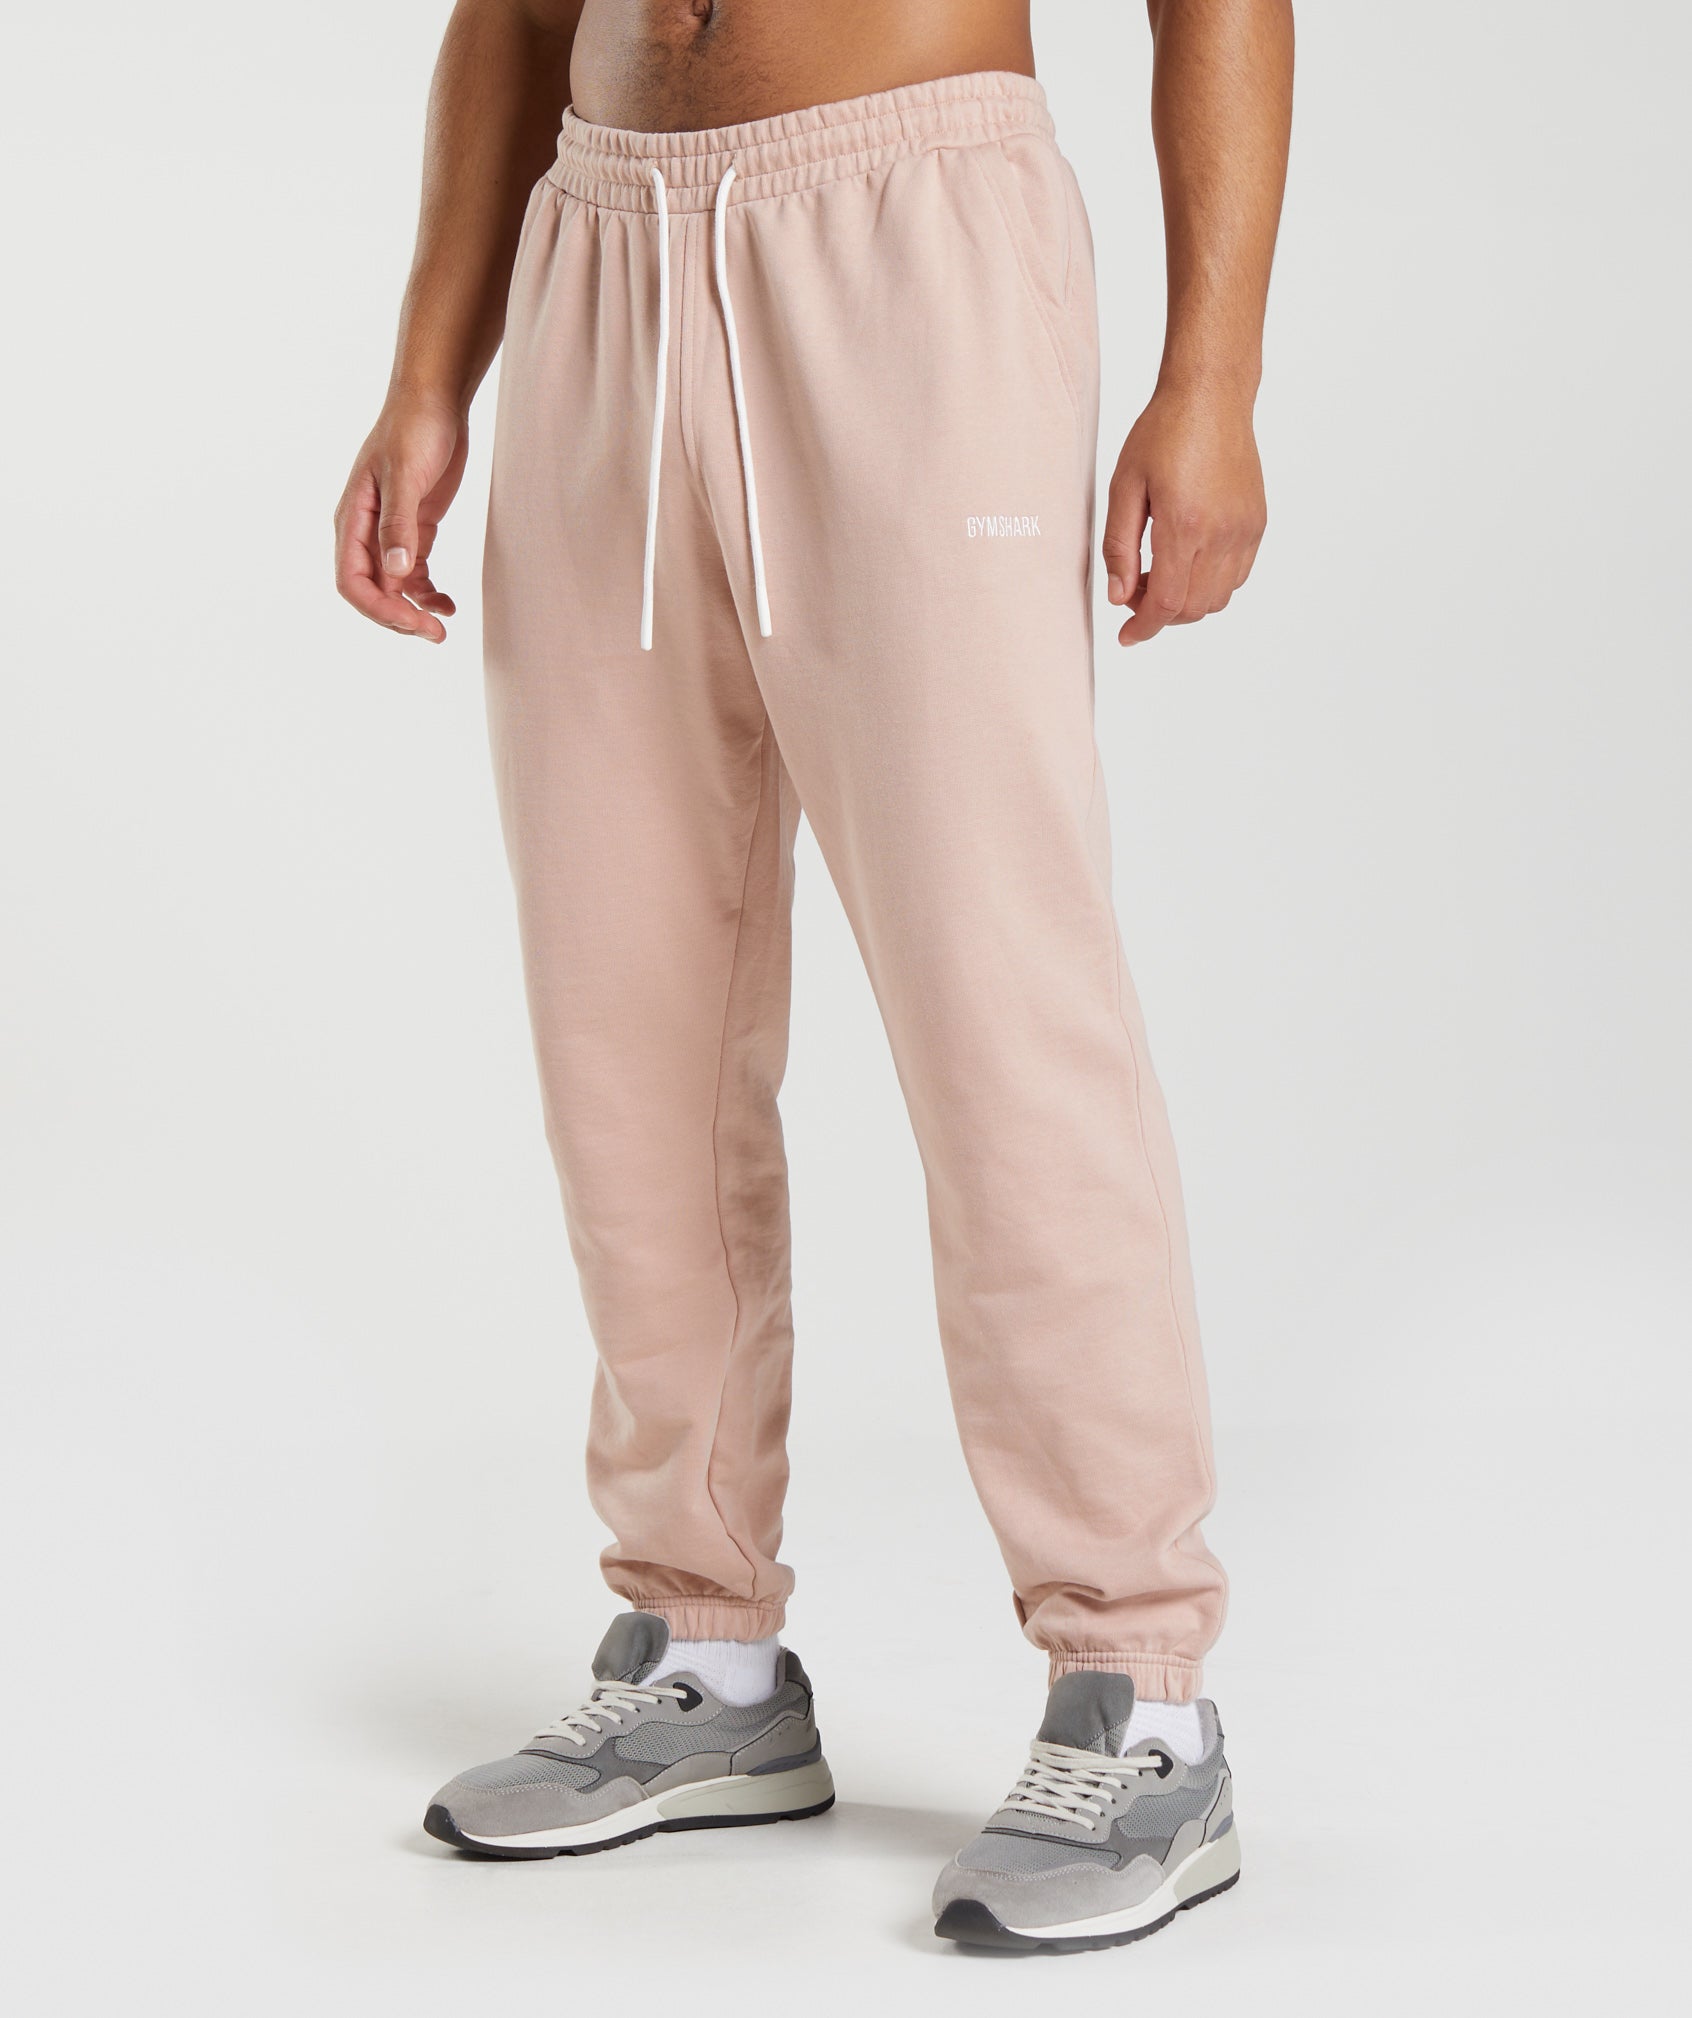 Rest Day Sweats Joggers in Dusty Taupe - view 1